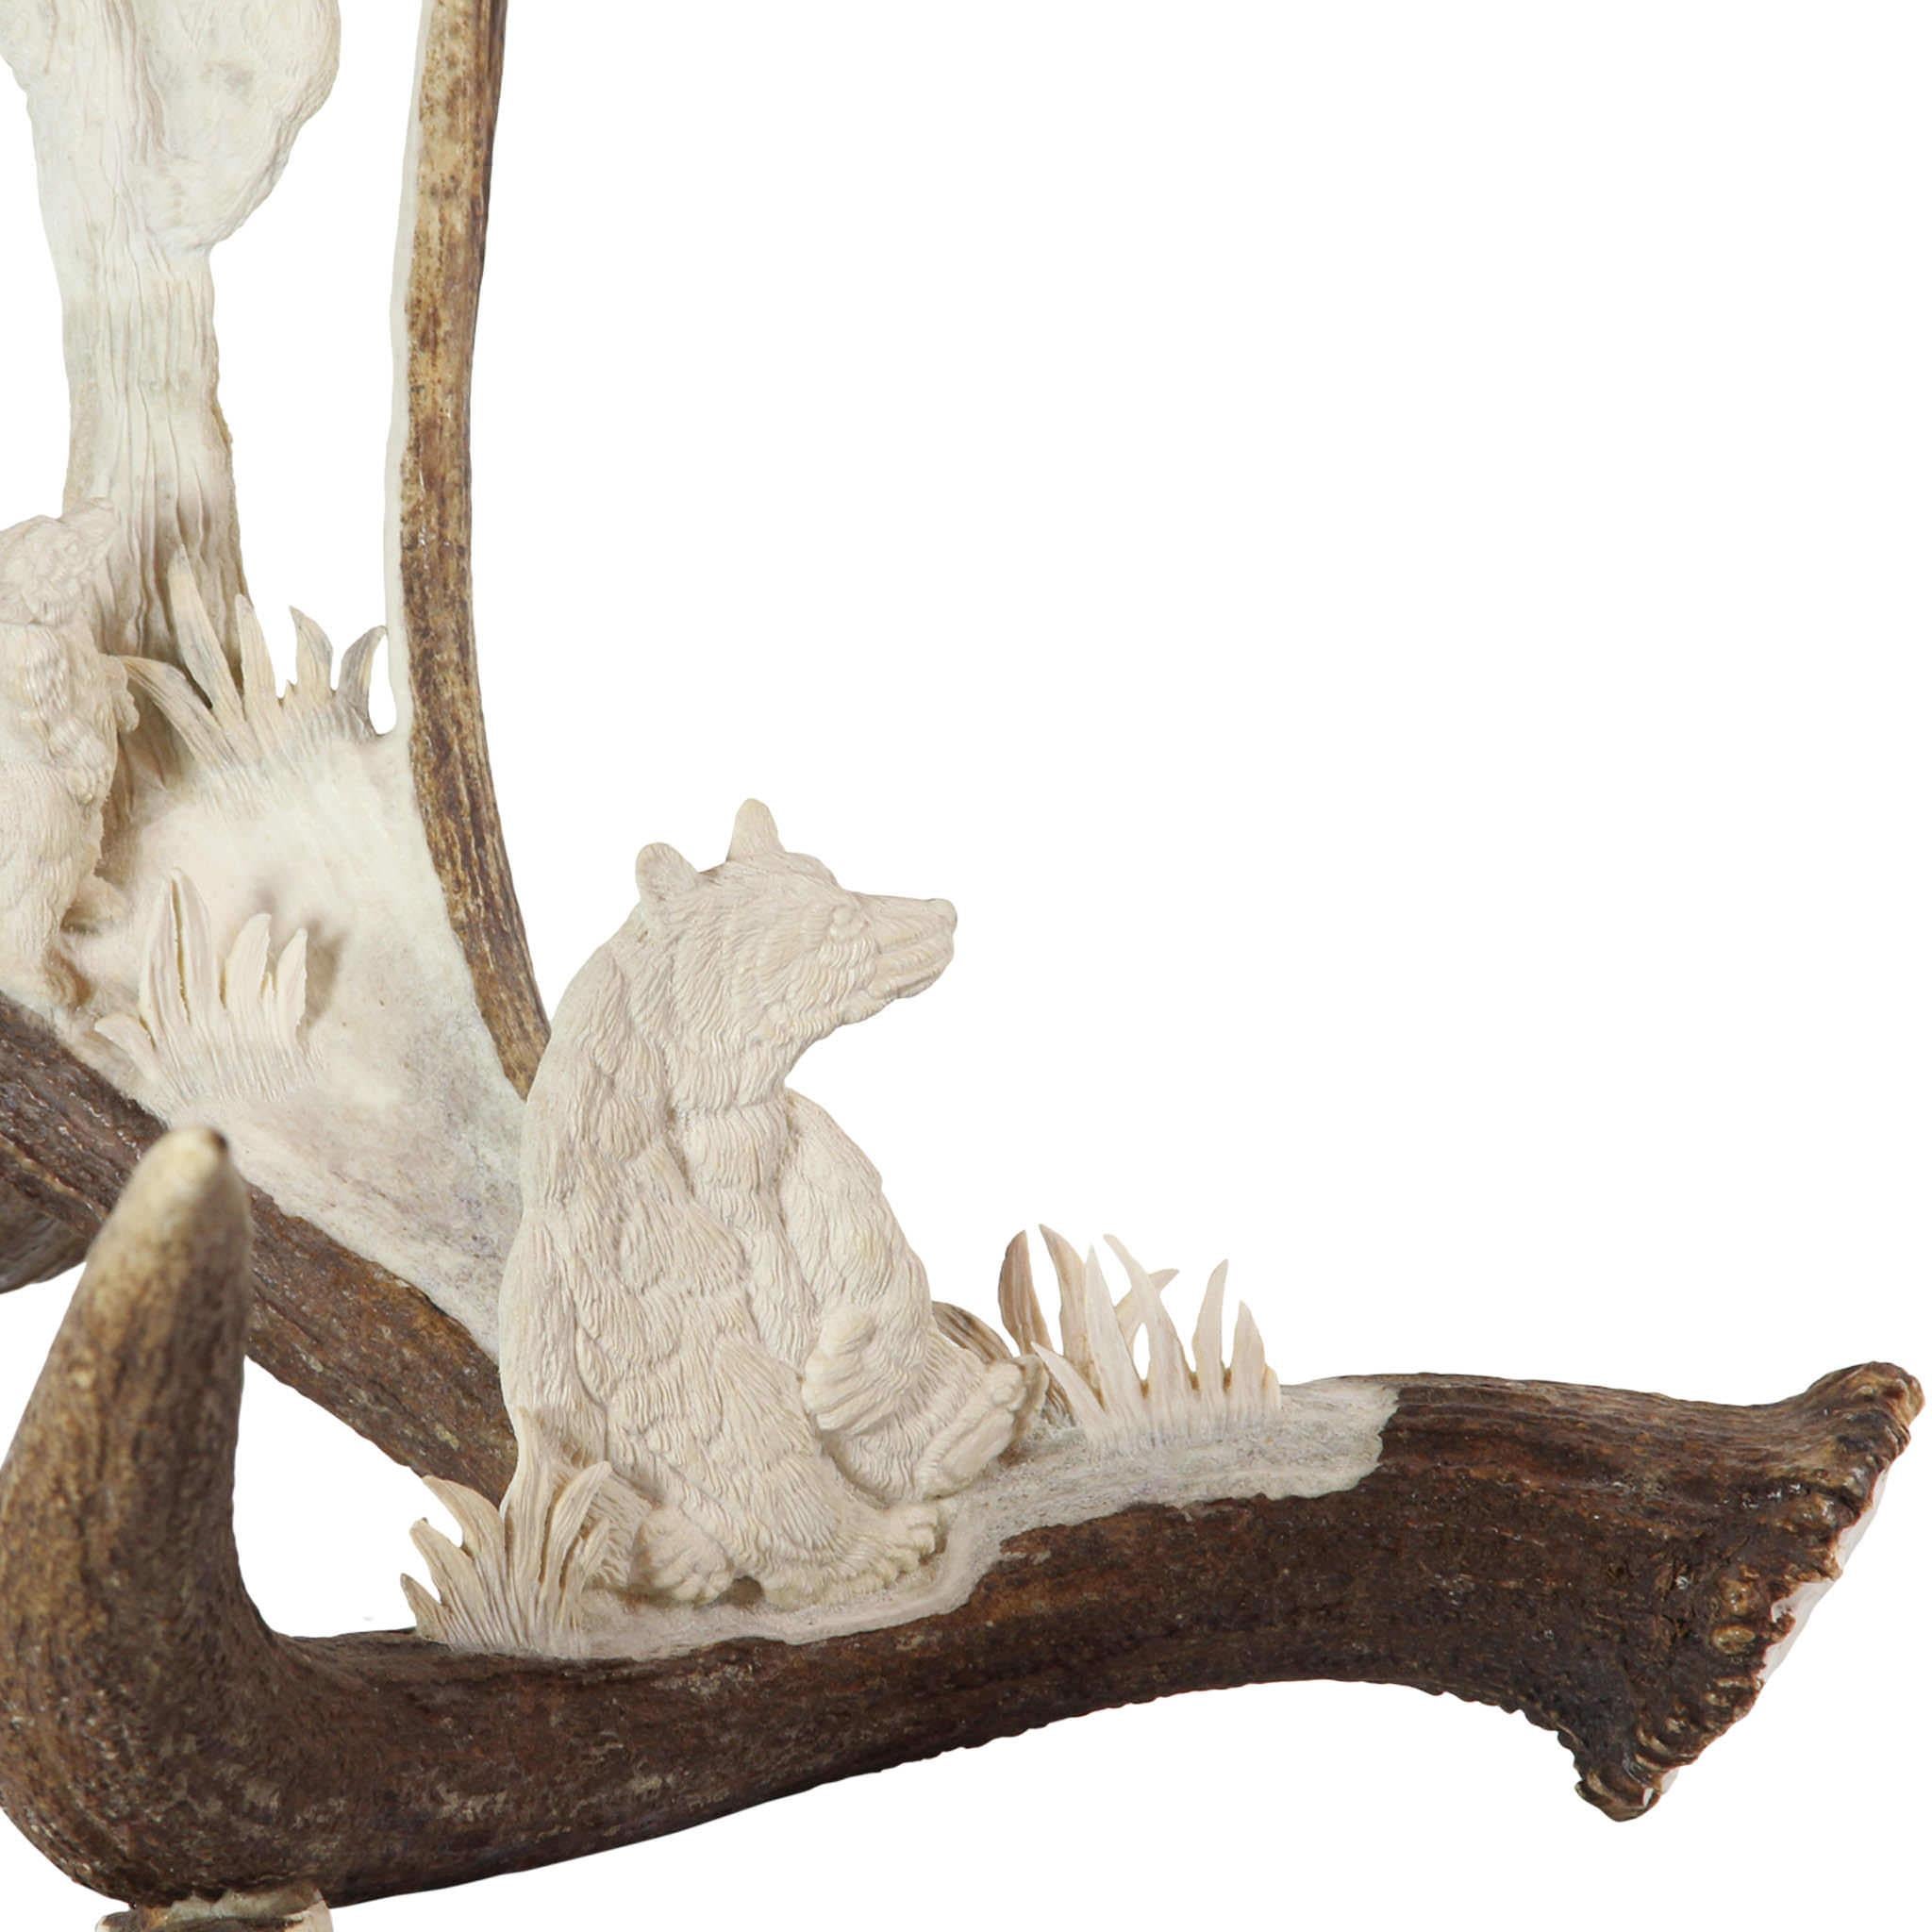 This stunning, carved moose antler features a mama bear sitting watchfully as her cubs climb a tree to get to a bee hive. Painstakingly carved by master artisan and Wyoming native Dee Jorgensen, the carving is an original one-of-a-kind from a shed